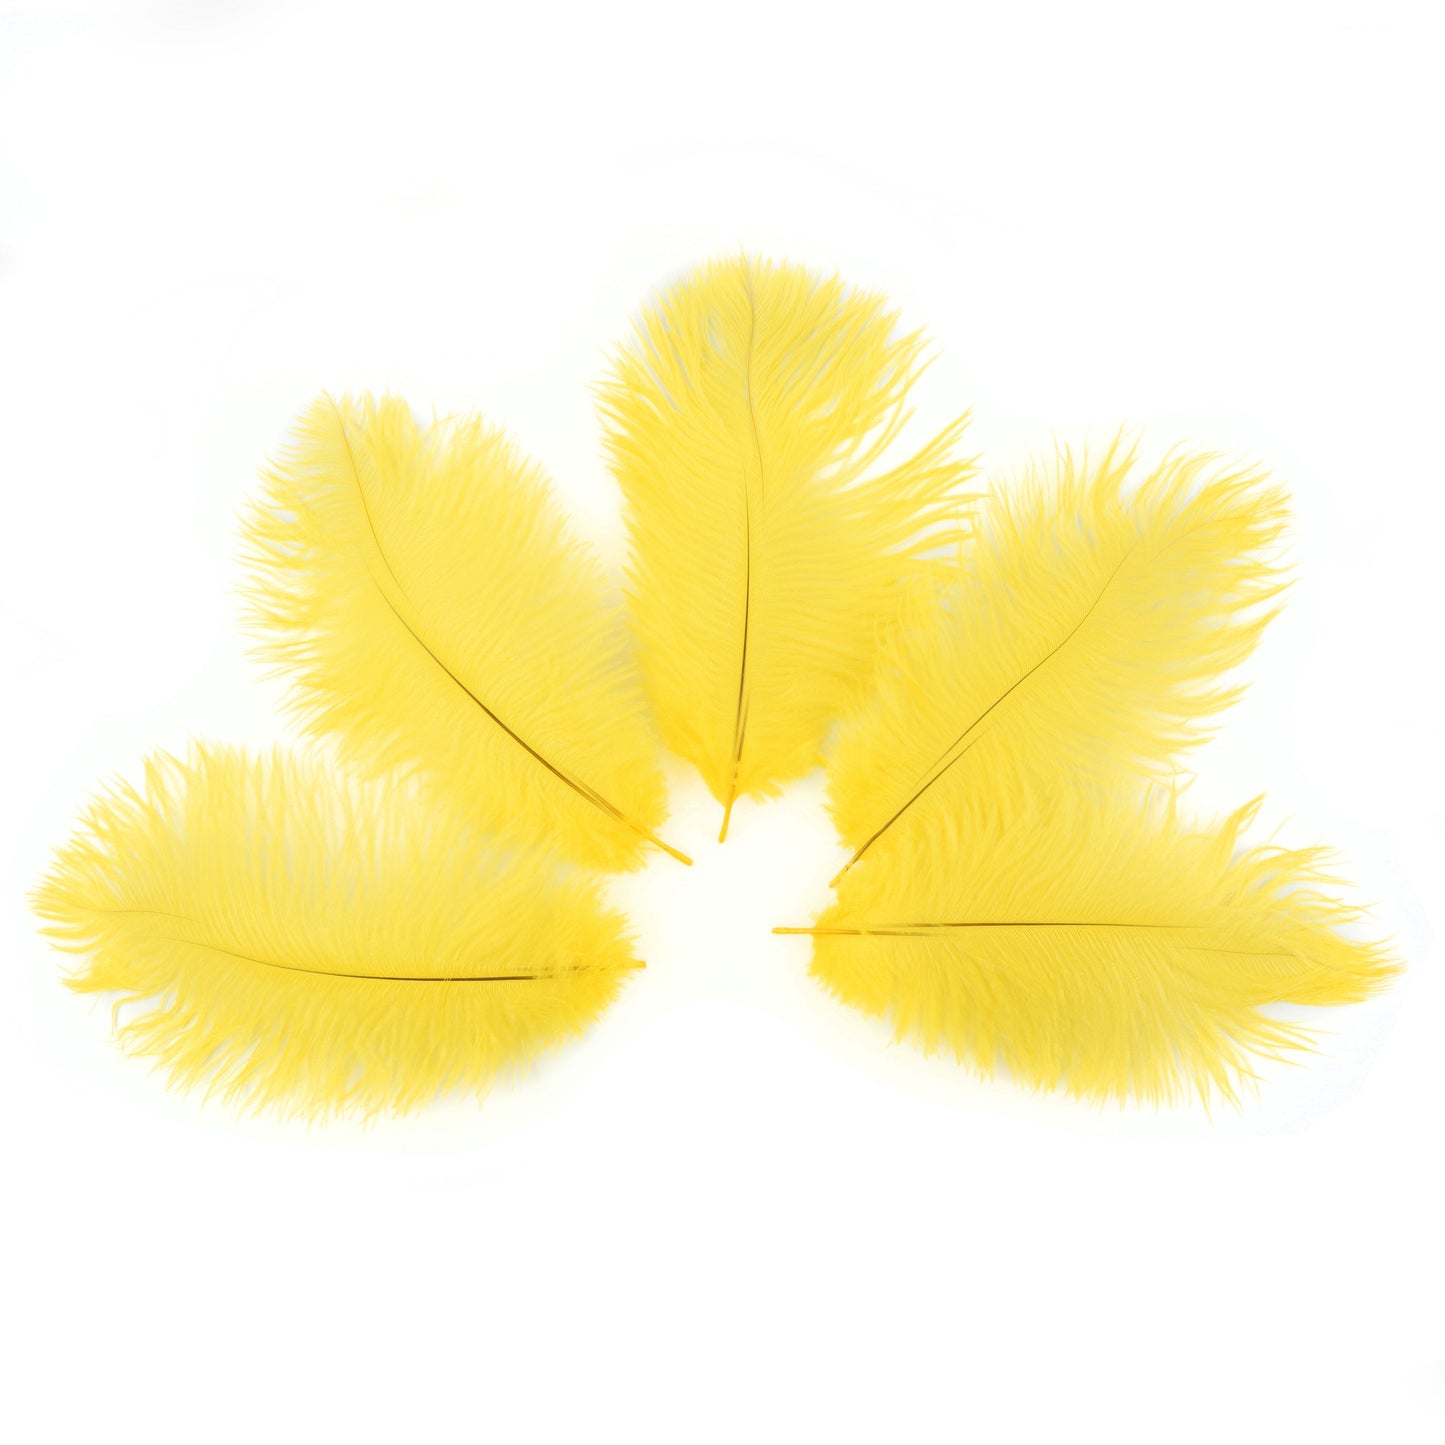 Ostrich Feathers 4-8" Drabs - Yellow